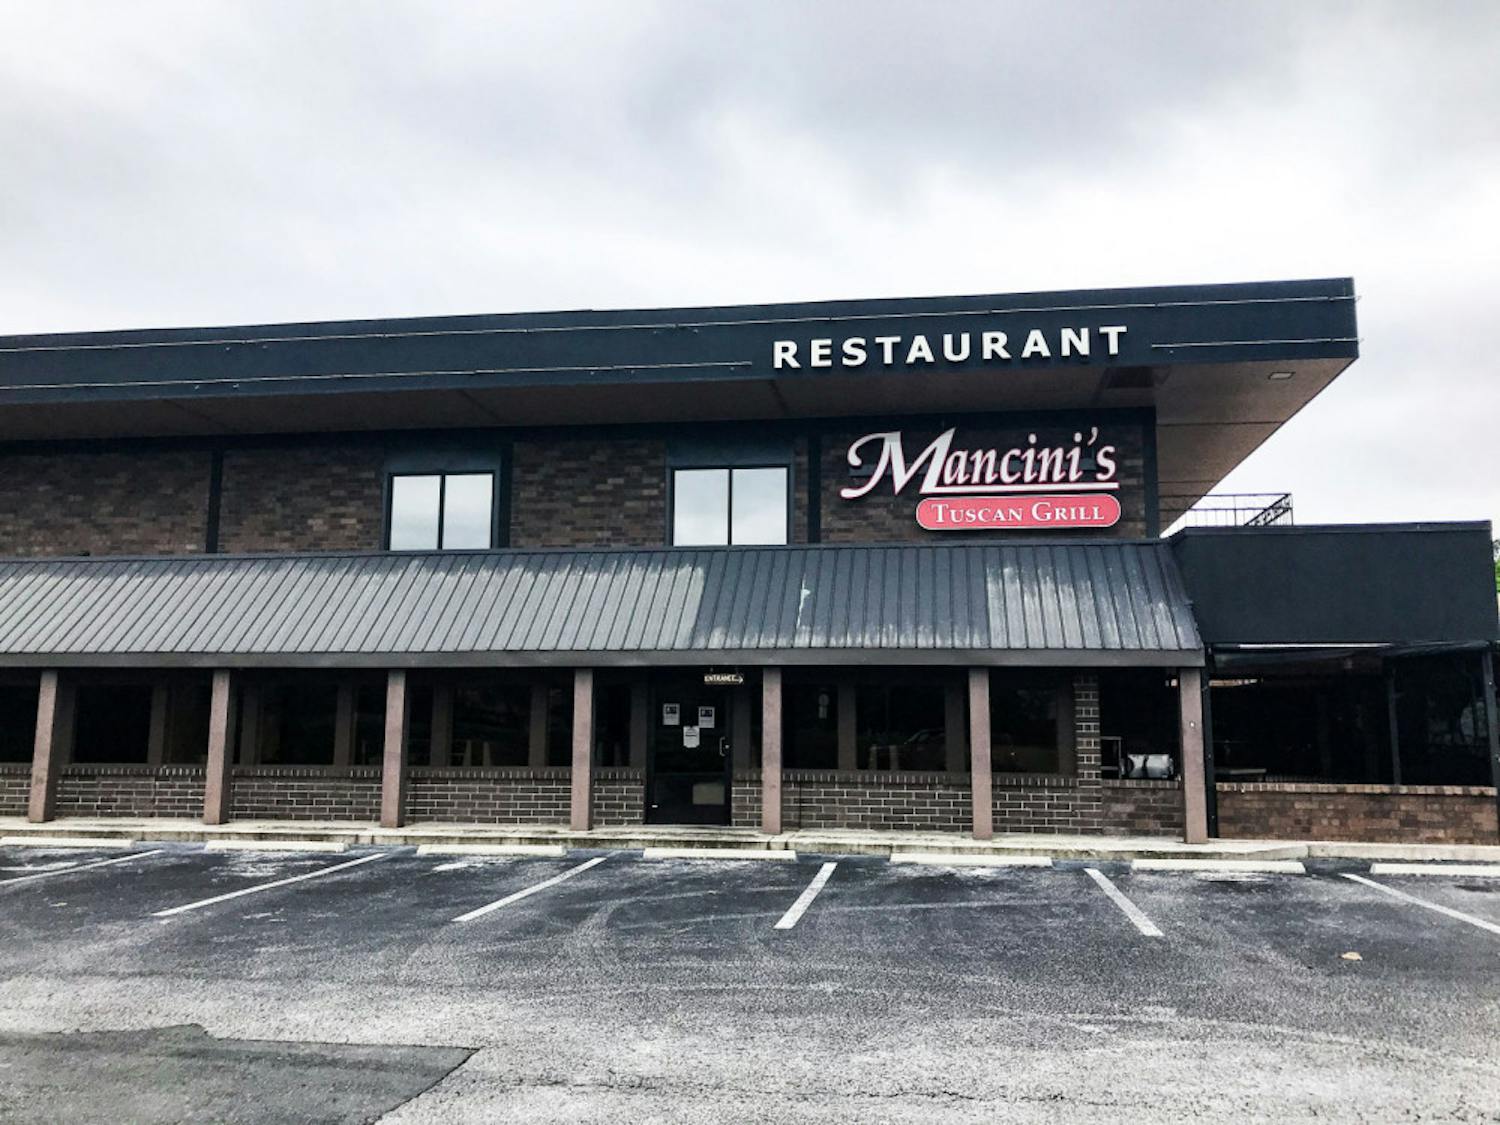 The Copper Monkey will be reopening April 23 in the Creekside Mall, located on 3501 SW Second Ave., in the old location of Mancini's Restaurant. It will have two stories, with bars both downstairs and upstairs as well as a banquet room.